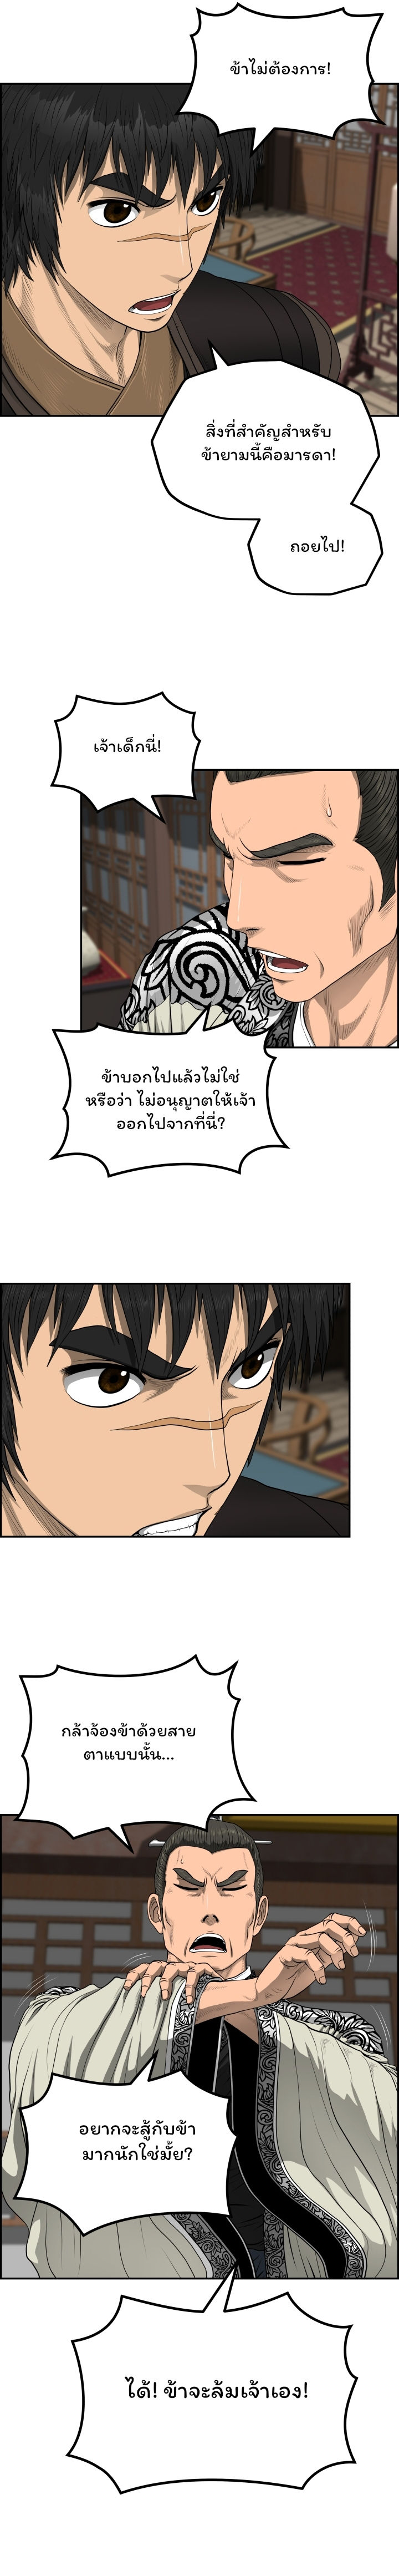 Blade Of Wind And Thunder 57 (8)